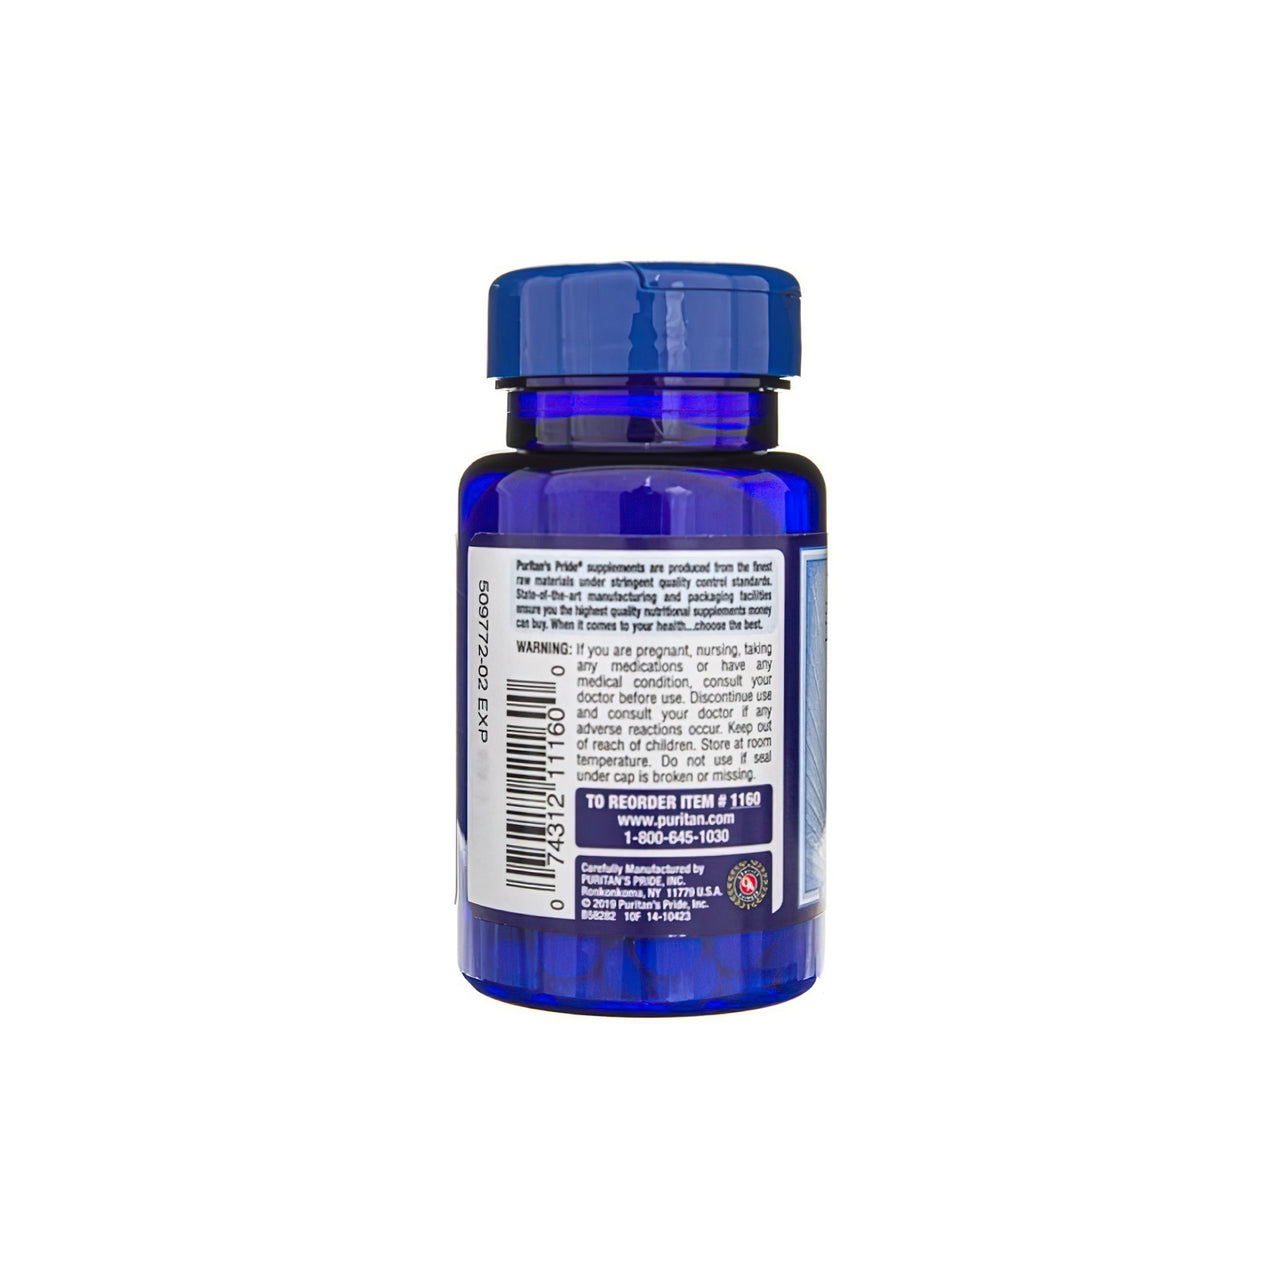 A bottle of Puritan's Pride Vitamin B-6 Pyridoxine 50 mg 100 tablets, promoting cardio health and energy metabolism, on a white background.